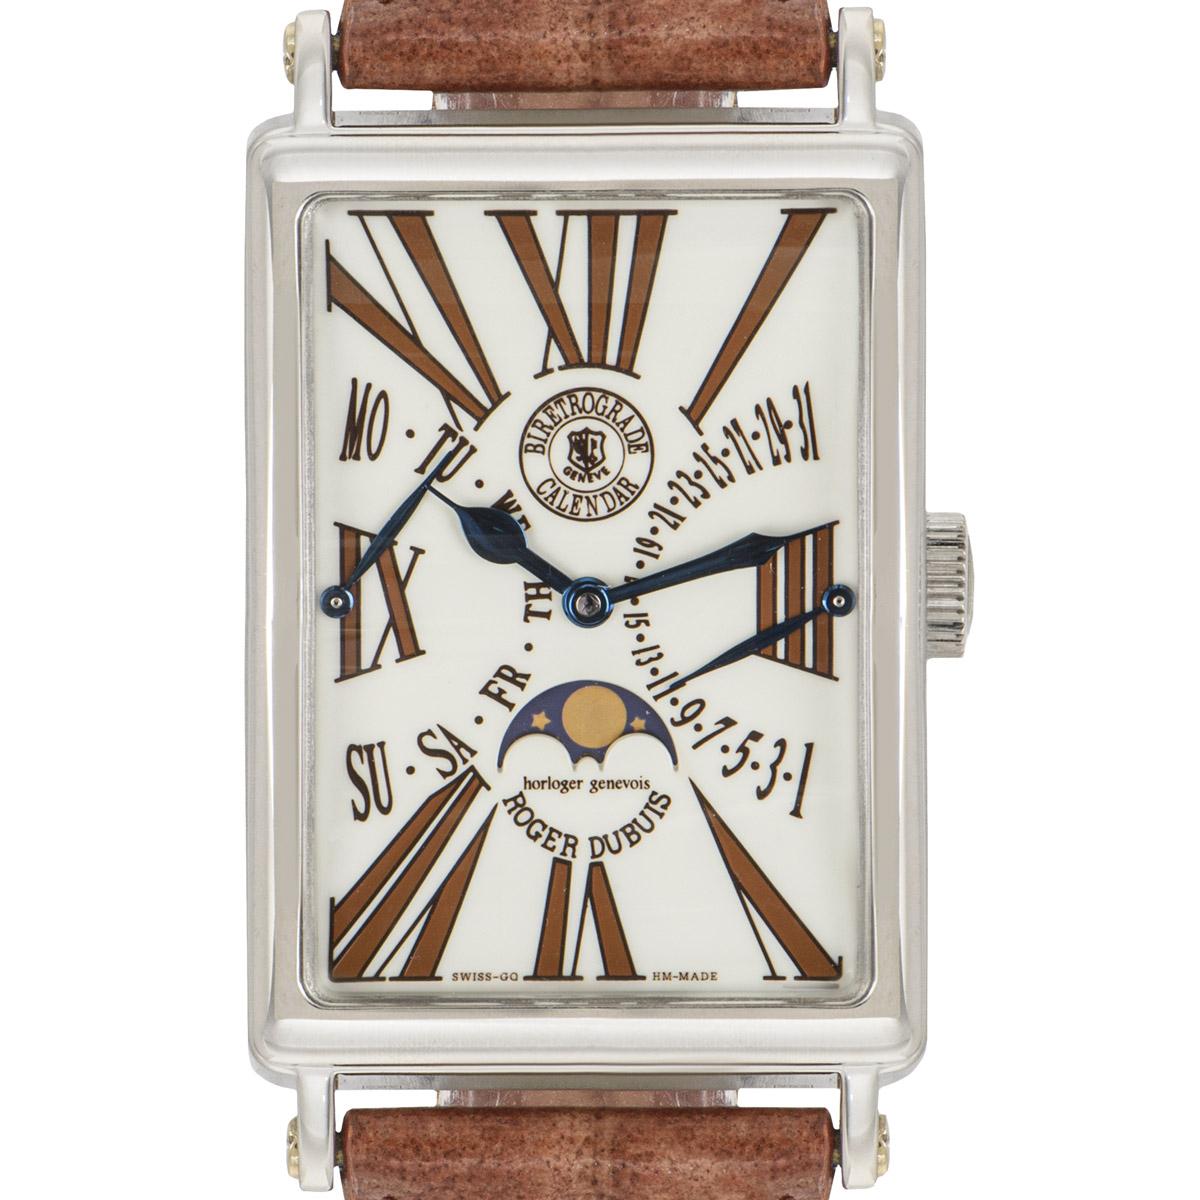 A classic Bi-Retrograde 34mm wristwatch by Roger Dubuis crafted in white gold. Featuring a cream dial with roman numerals, a date and day display as well as a moon phase indicator. Fitted with a scratch-resistant sapphire crystal and powered by a